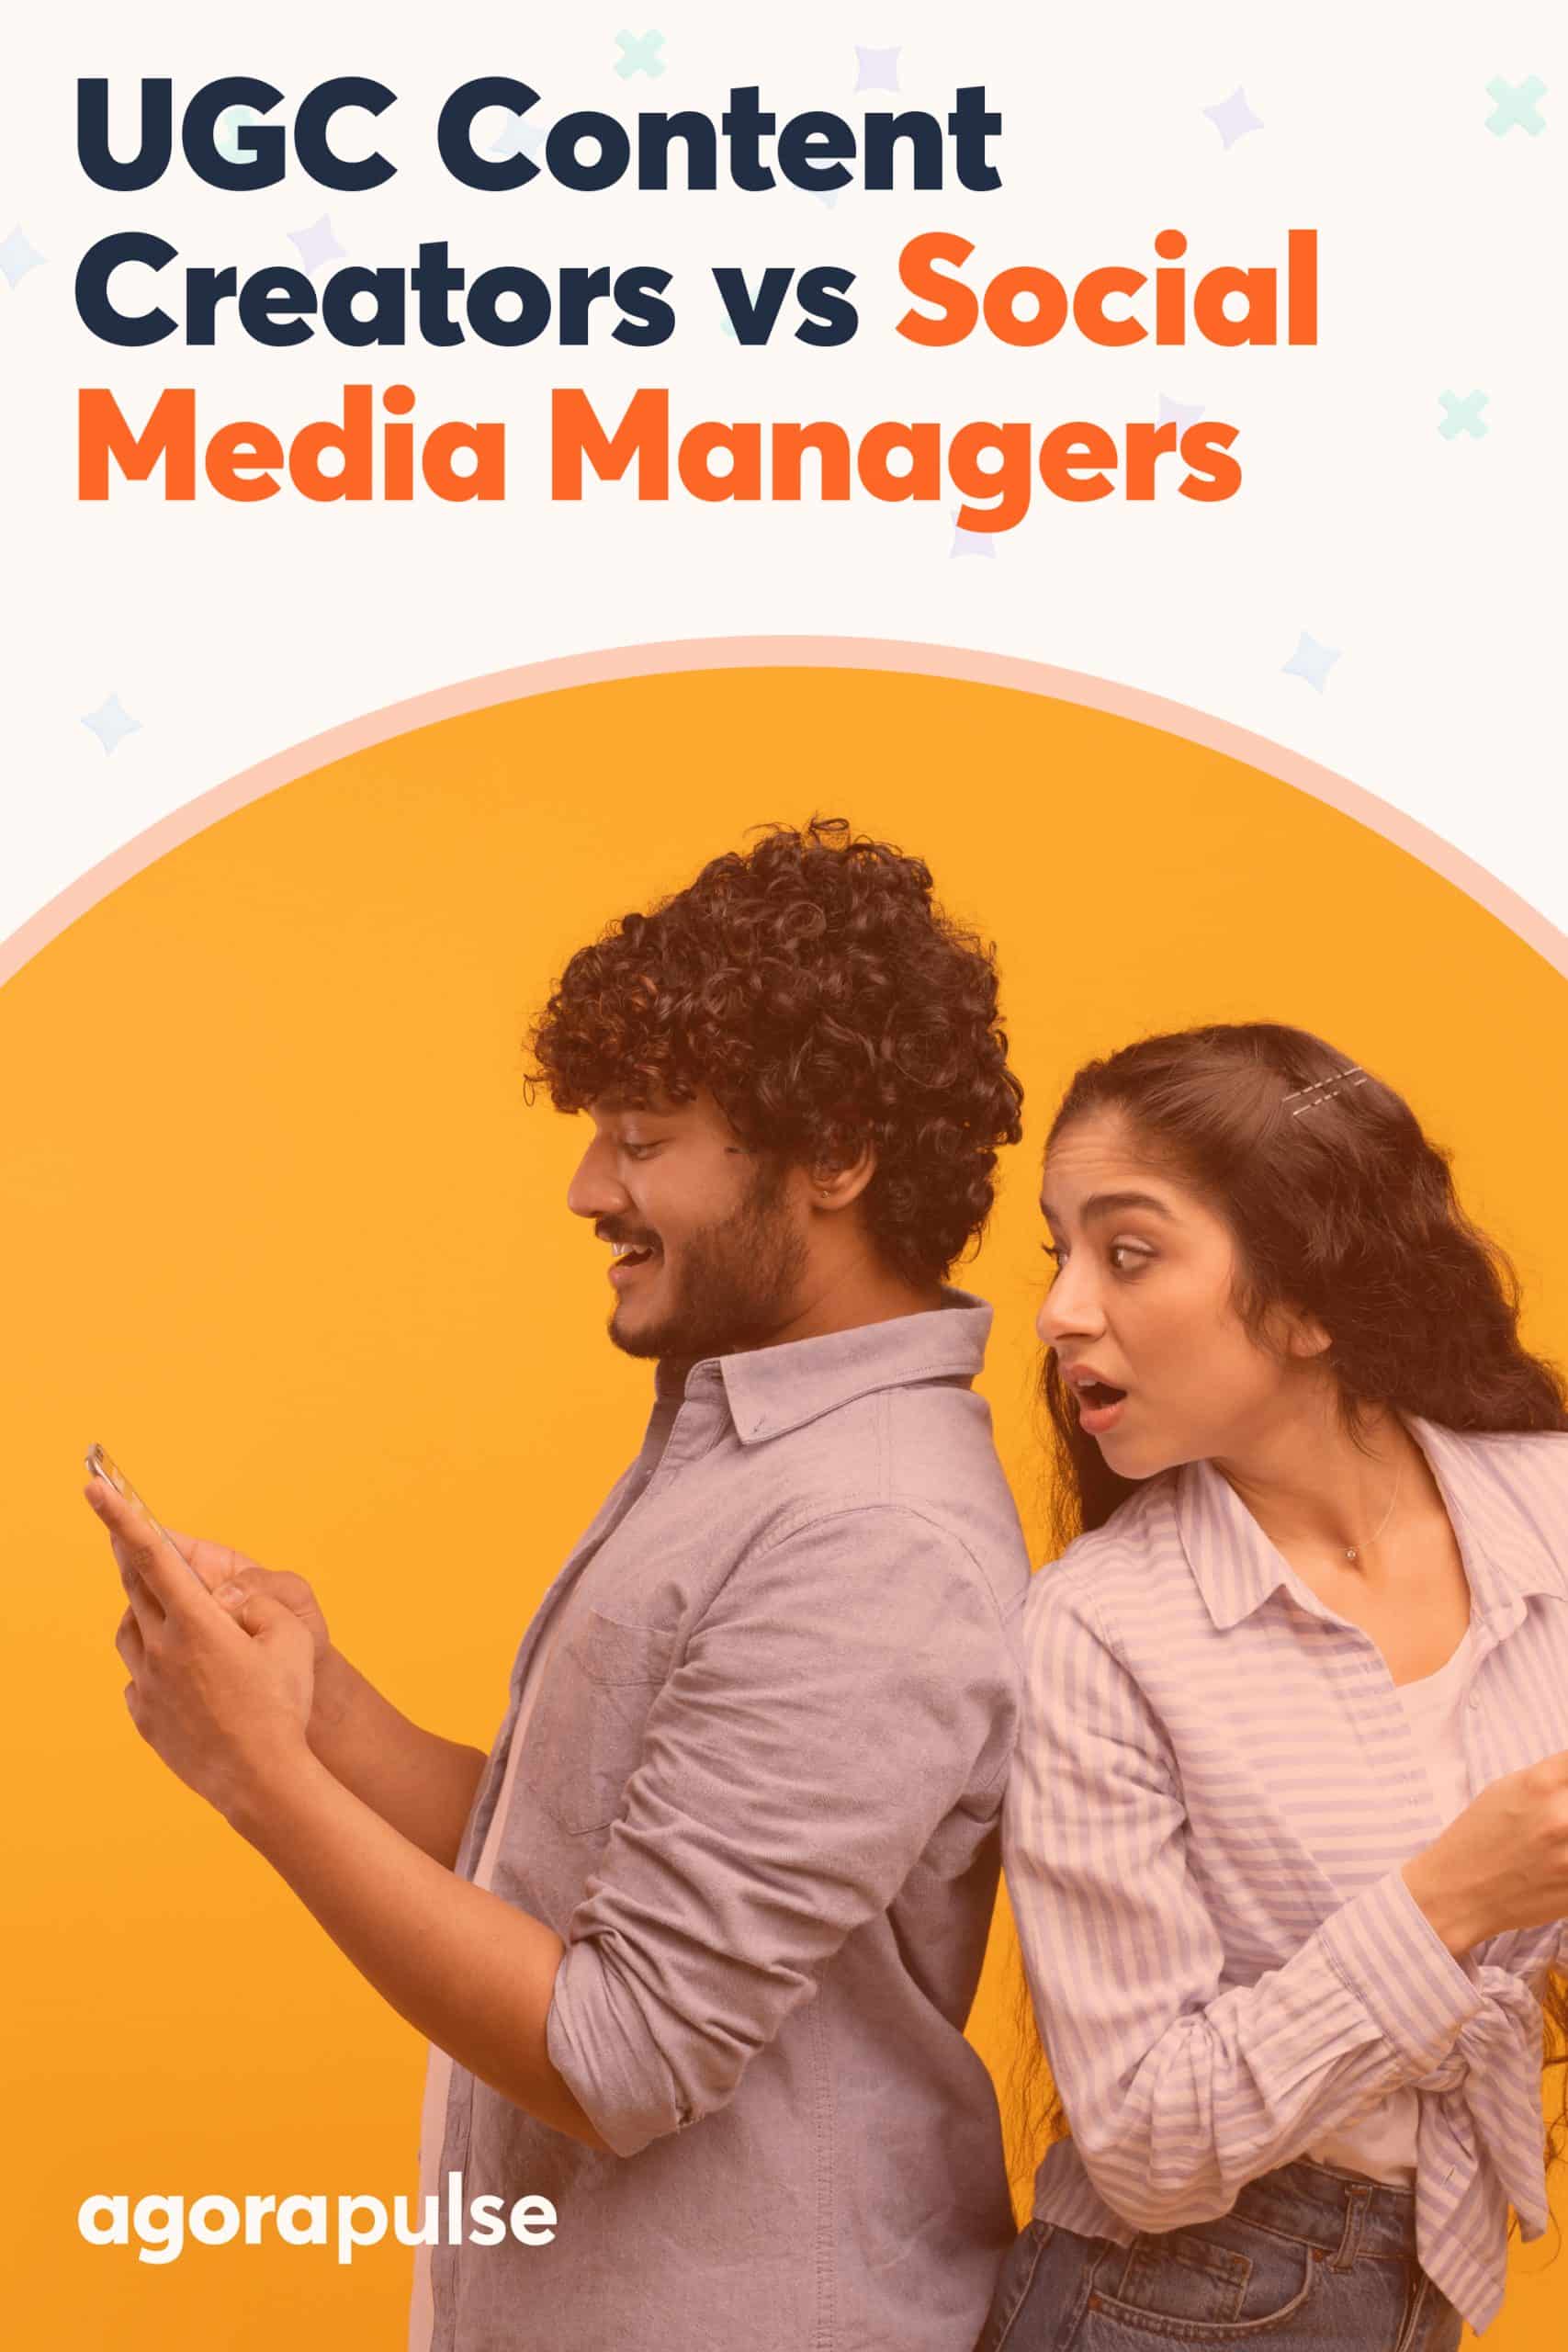 UGC Content Creators vs Social Media Managers: What CMOs Need to Know